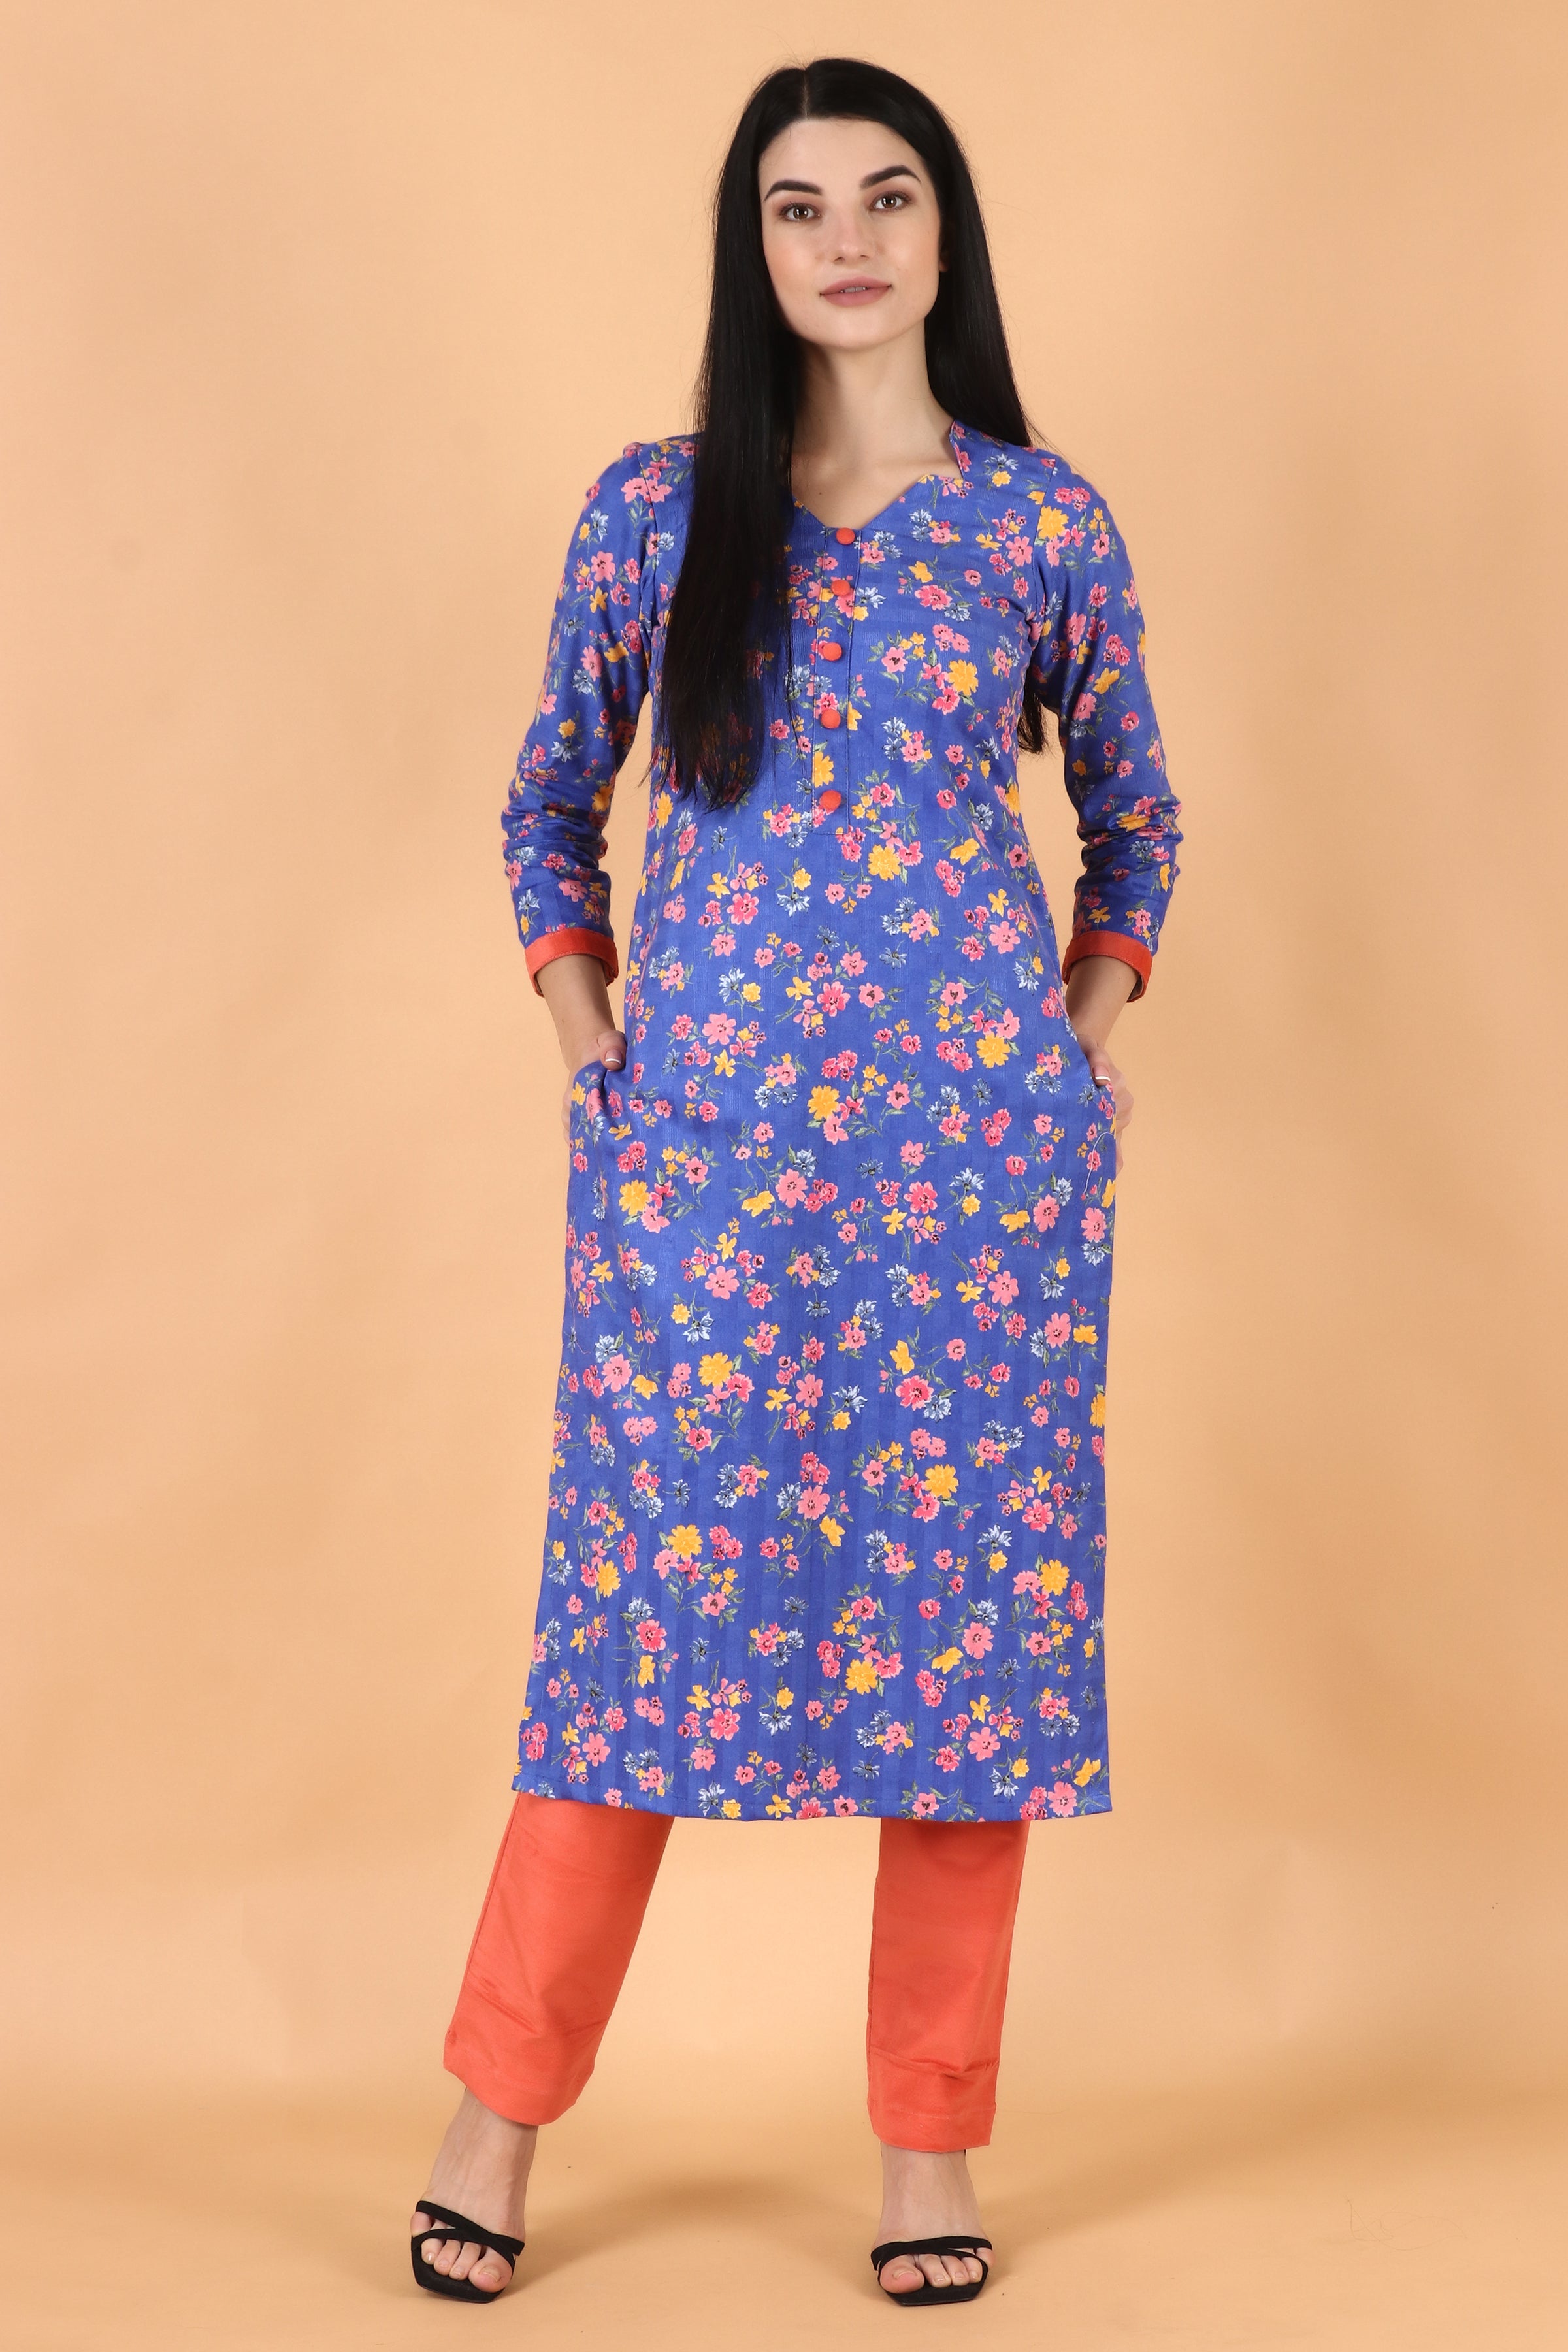 Best Of The Woolen Kurti To Look For This Winter Season